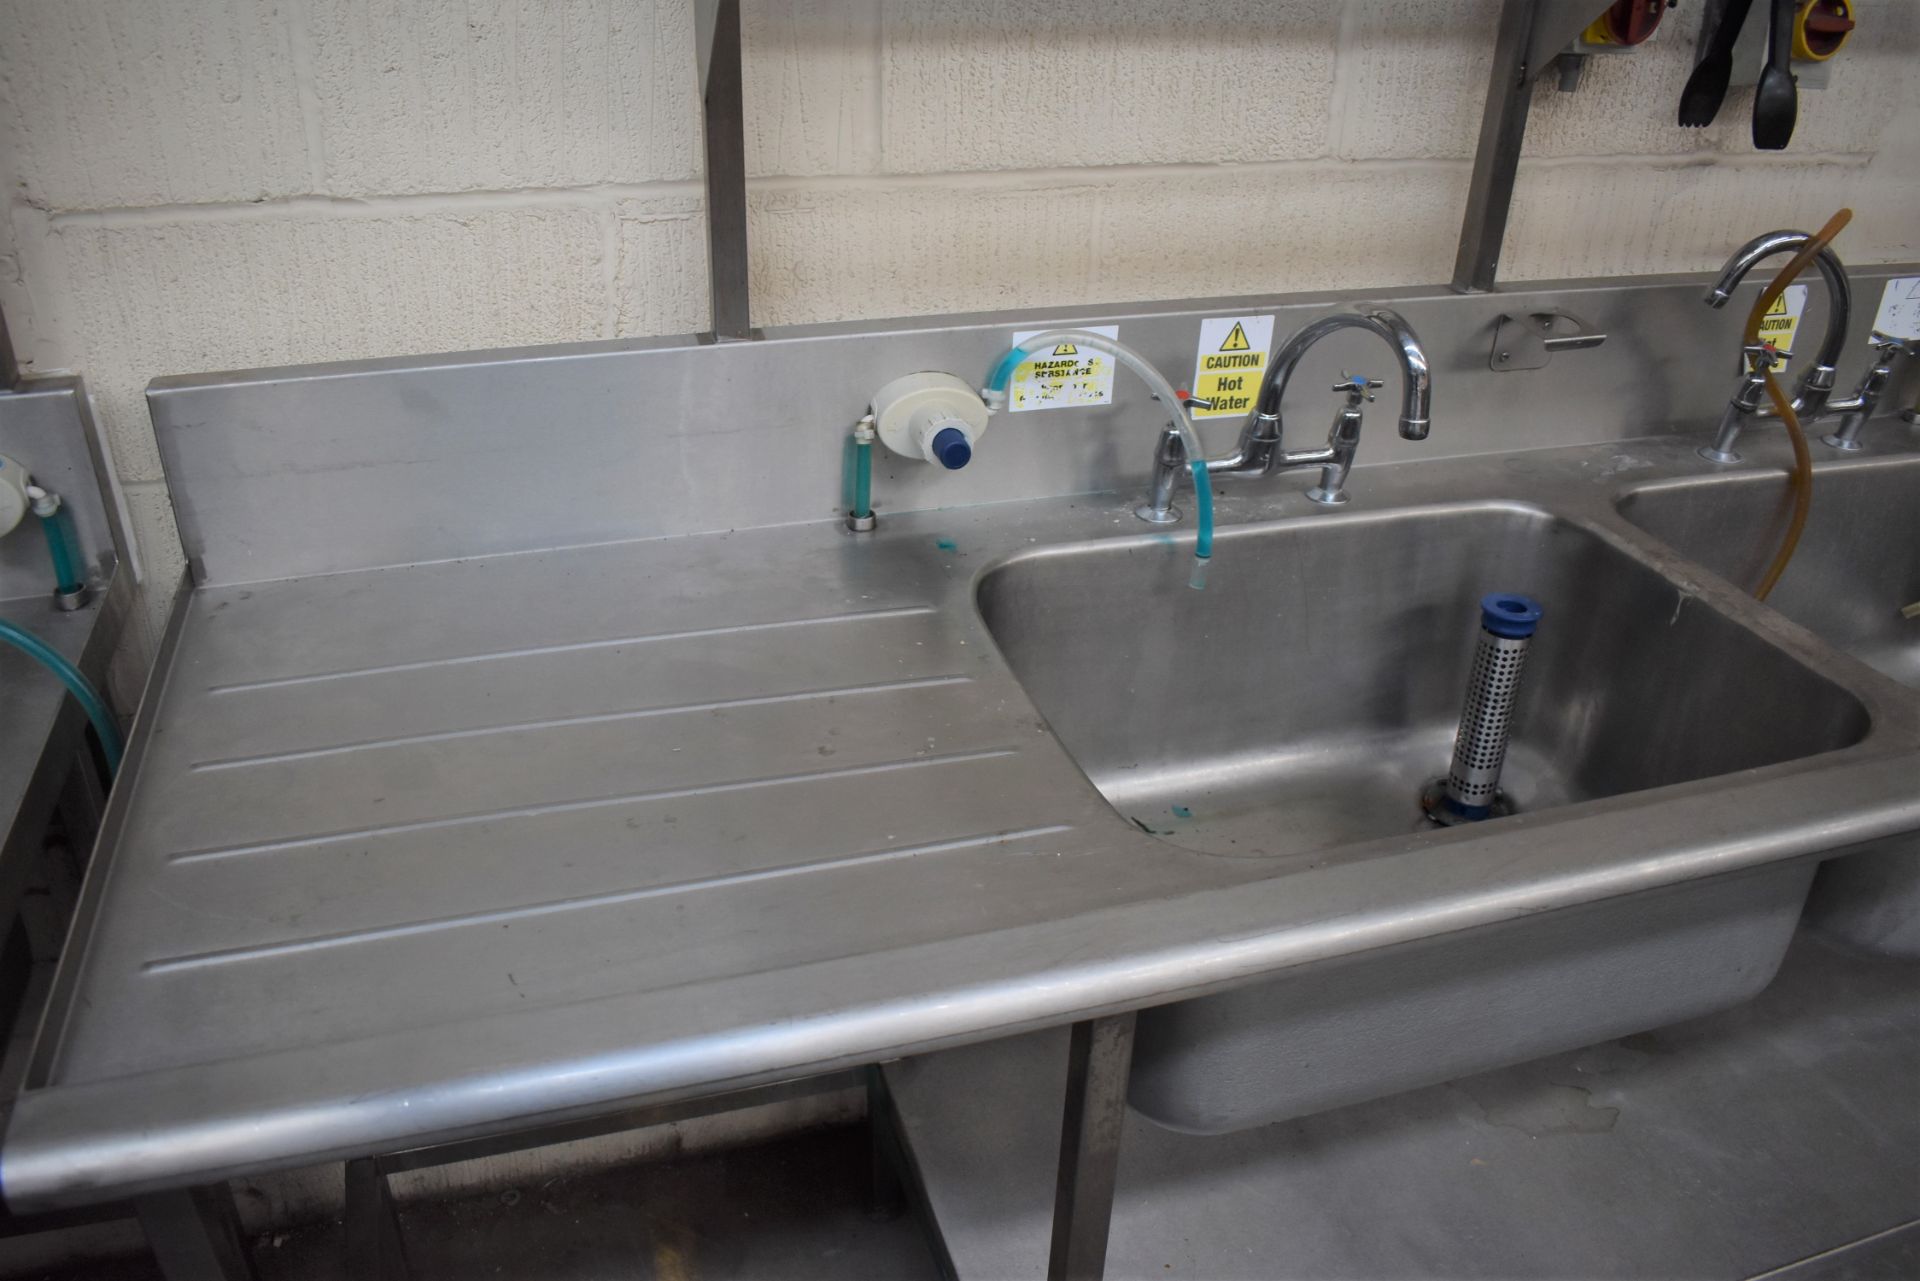 1 x Stainless Steel Commercial Wash Basin Unit With Twin Sink Bowl, Mixer Taps, Undershelf, Upstands - Image 5 of 8